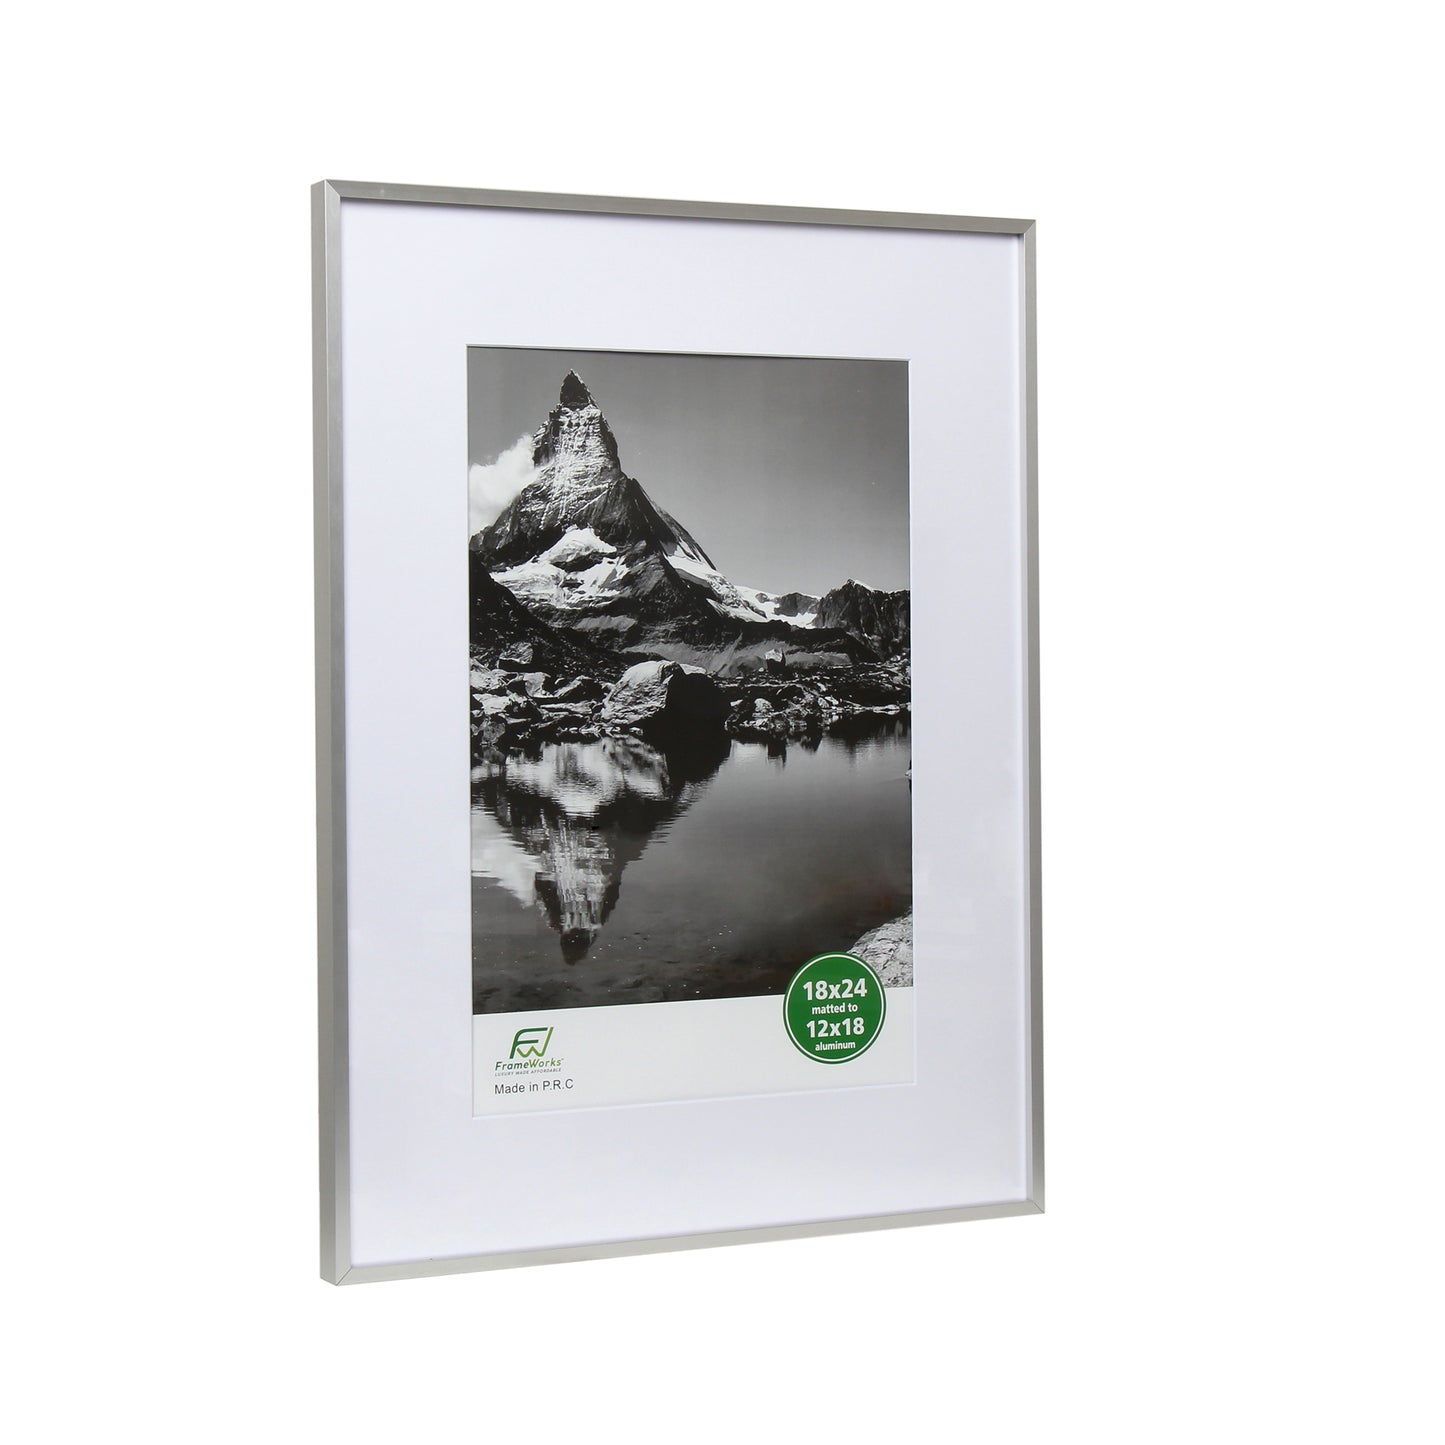 12 x 12 Deluxe Silver Aluminum Contemporary Picture Frame, 8 x